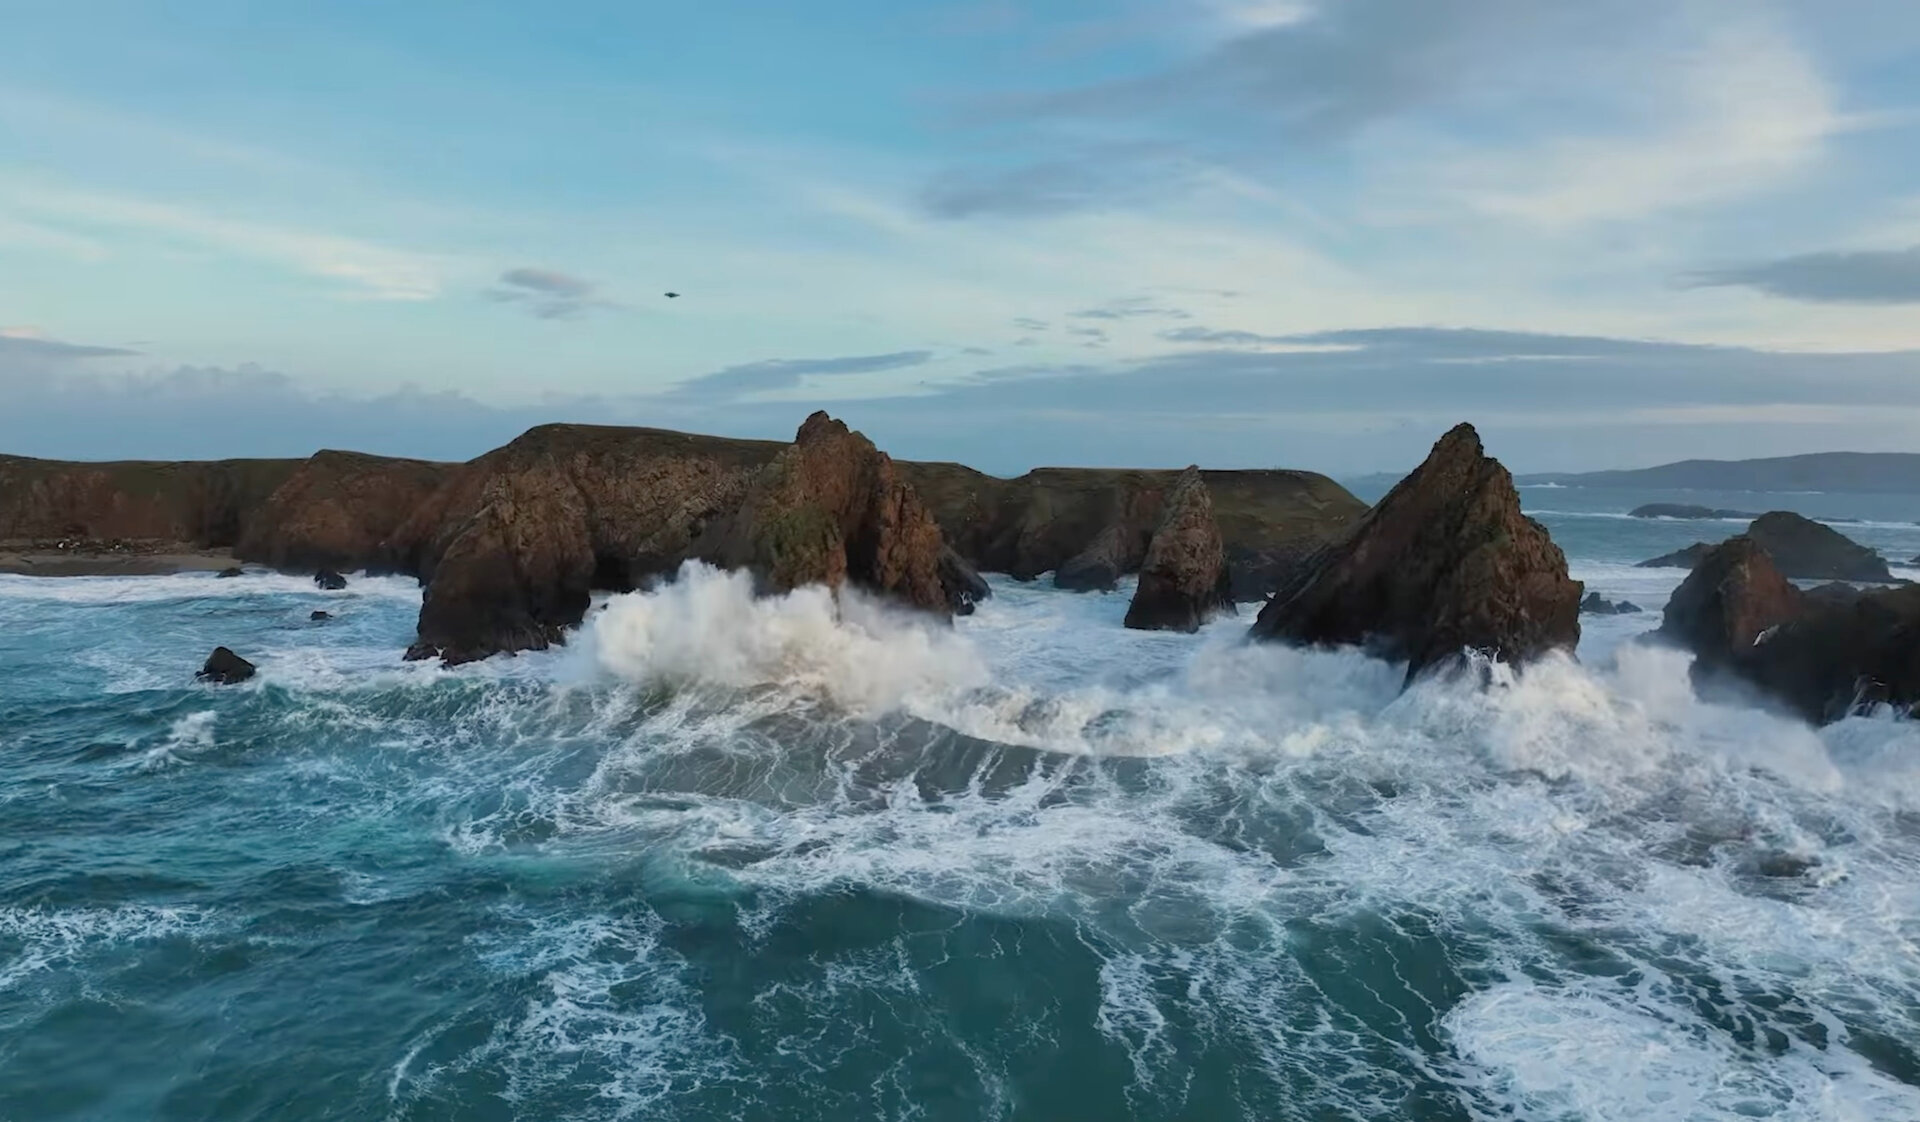 The film, produced by Promote Shetland, captured the raw energy of the islands in winter. Photo: Promote Shetland.